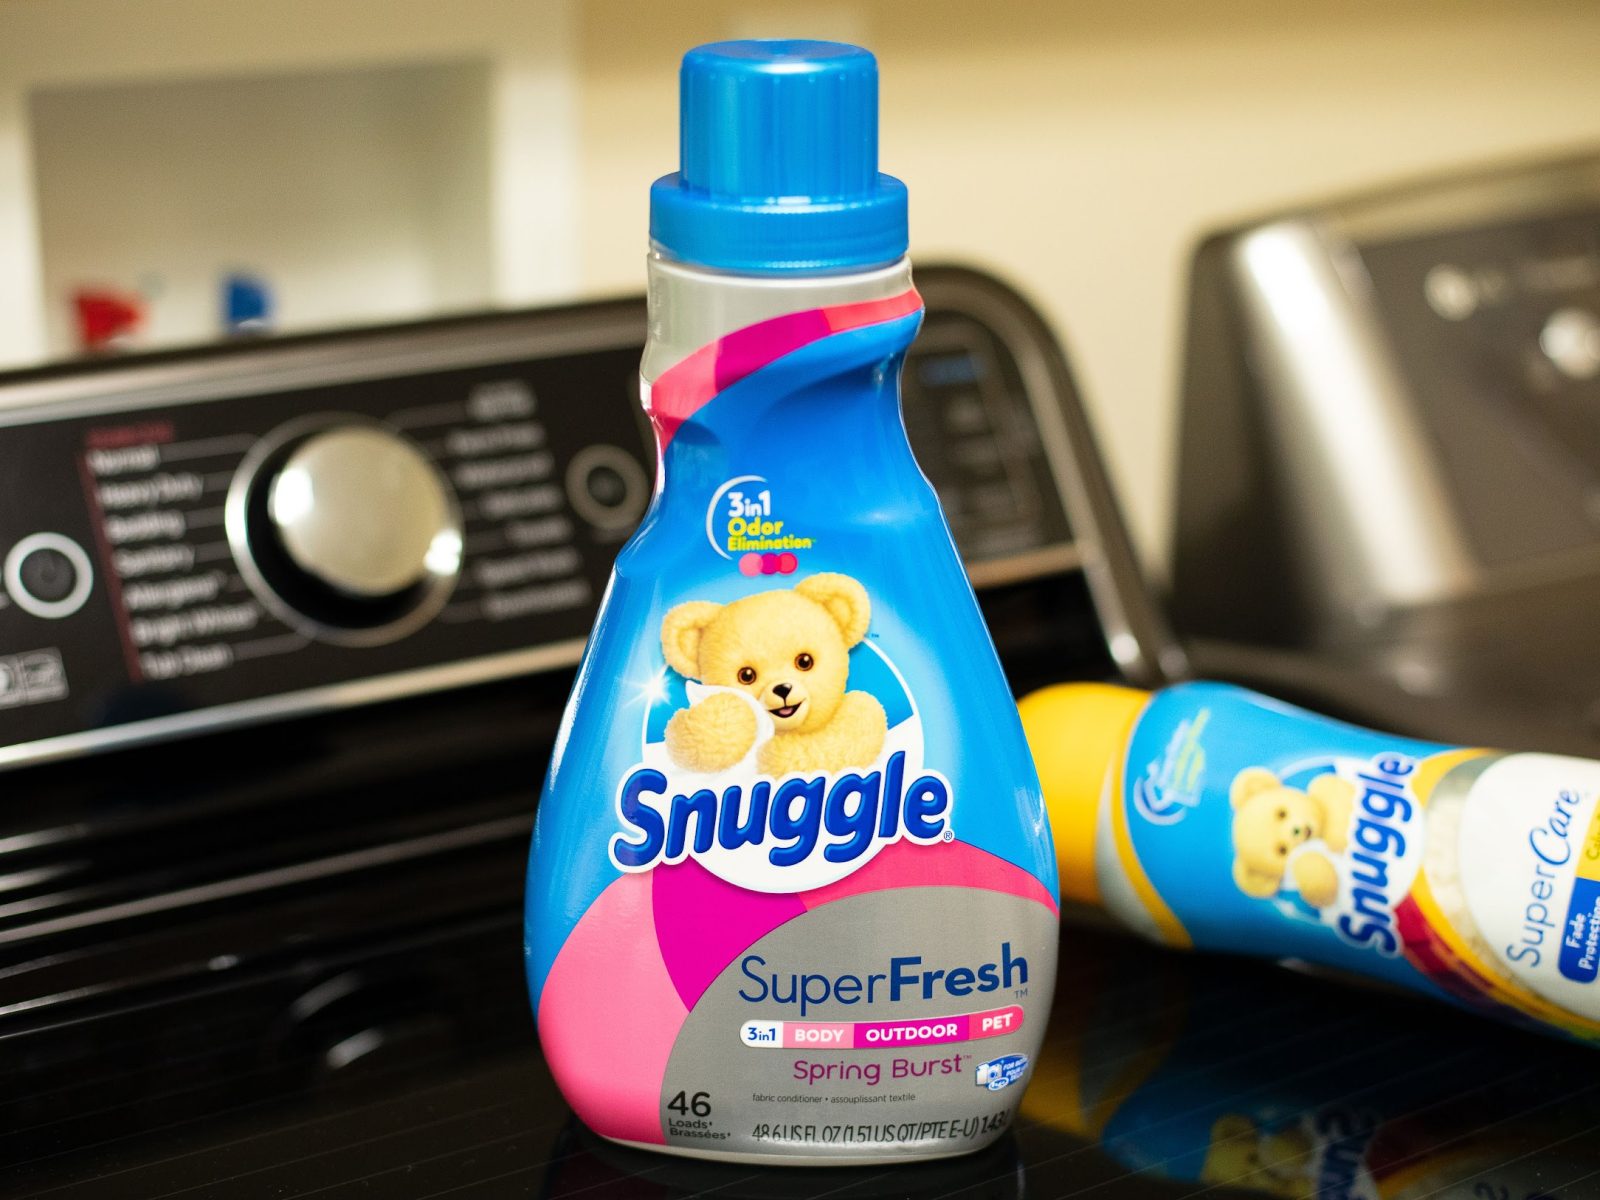 New Coupon Makes Snuggle Fabric Softener As Low As $2.50 At Publix